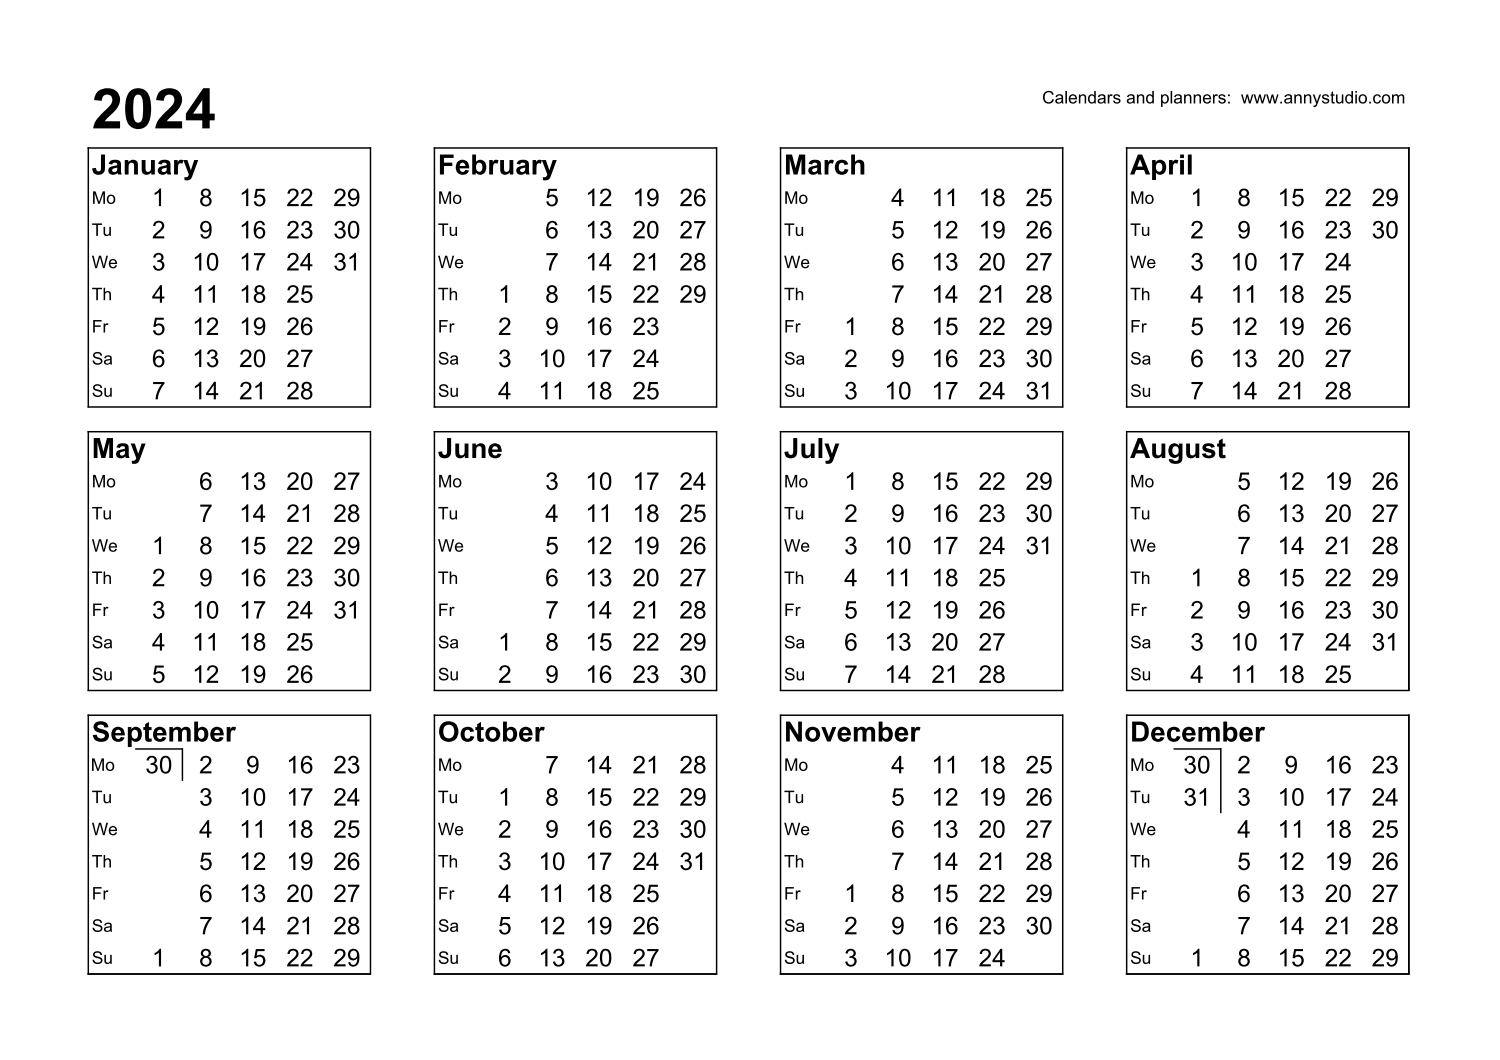 Free Printable Calendars And Planners 2024, 2025 And 2026 | Calendar 2024 Qld Printable